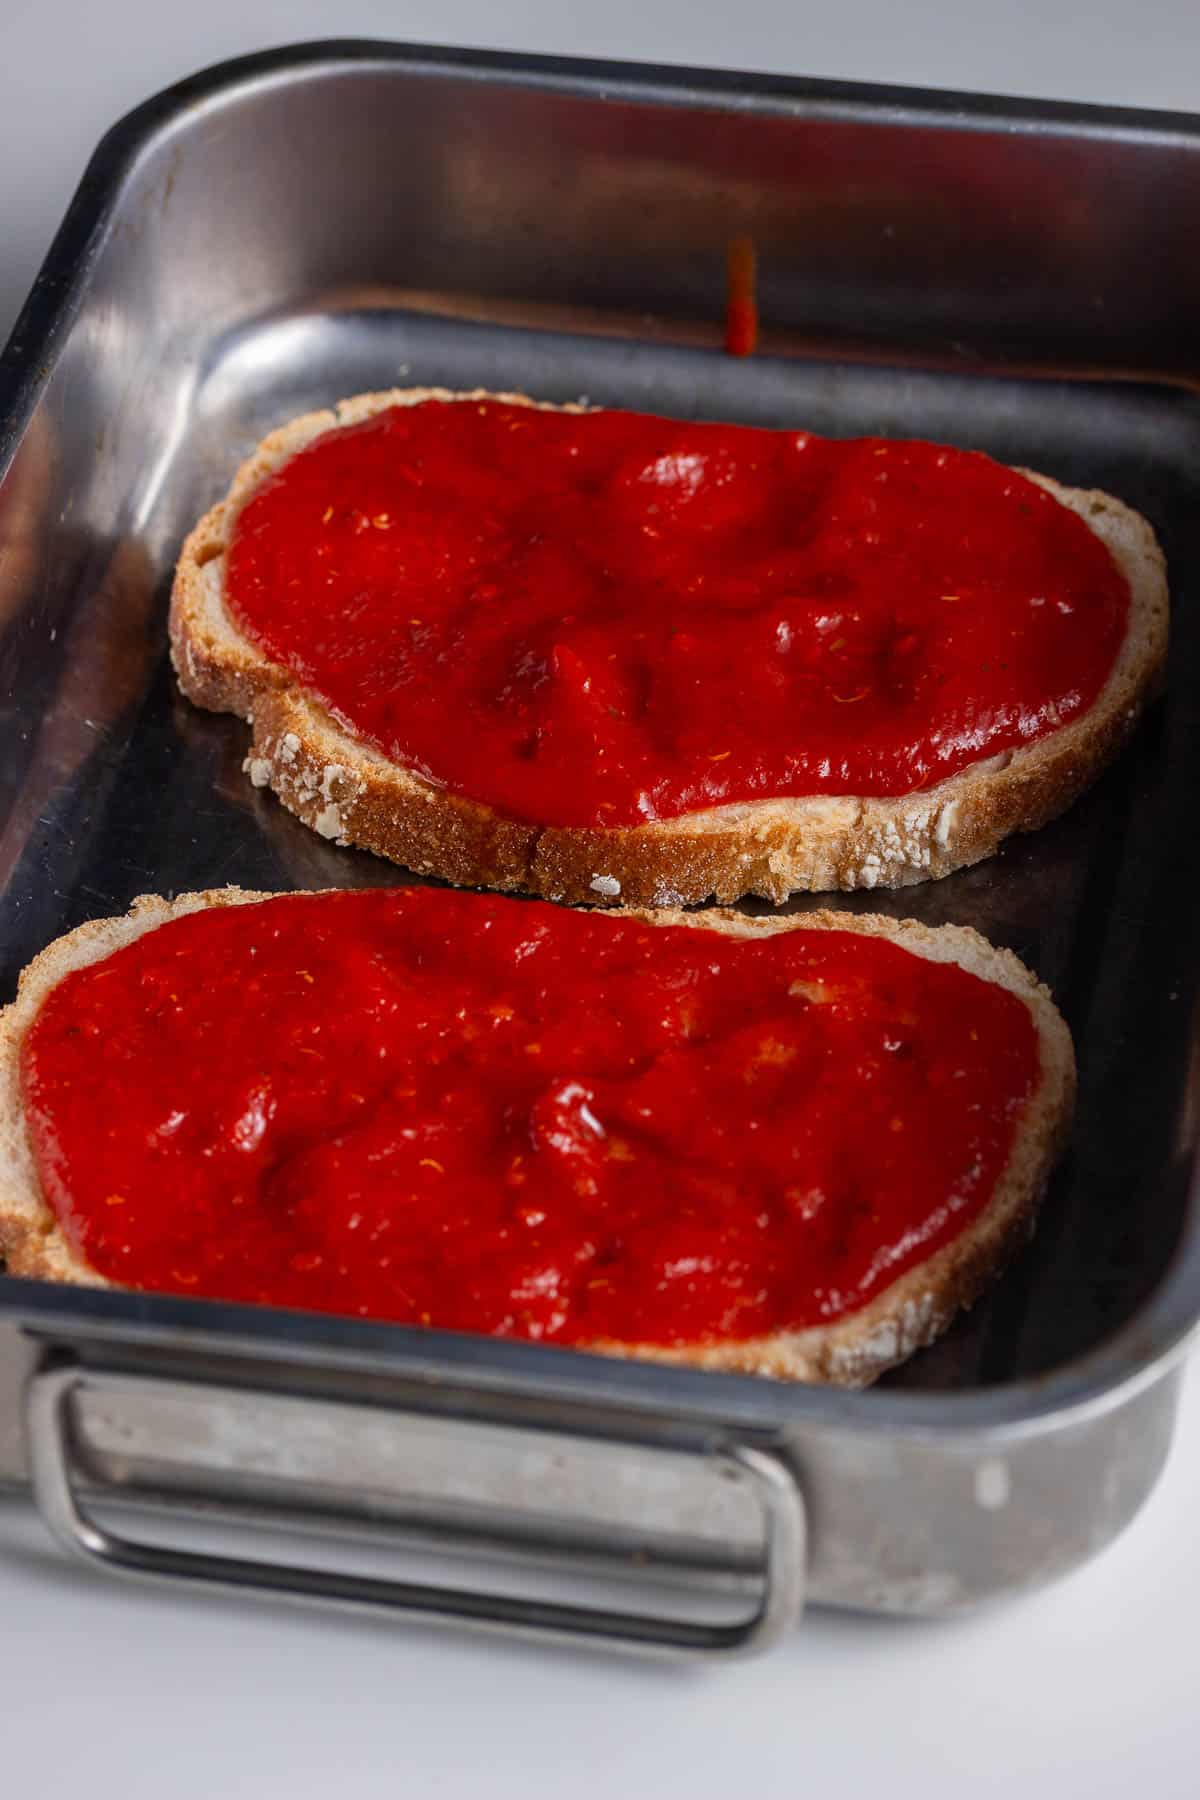 Silver baking tray of toast topped with sauce